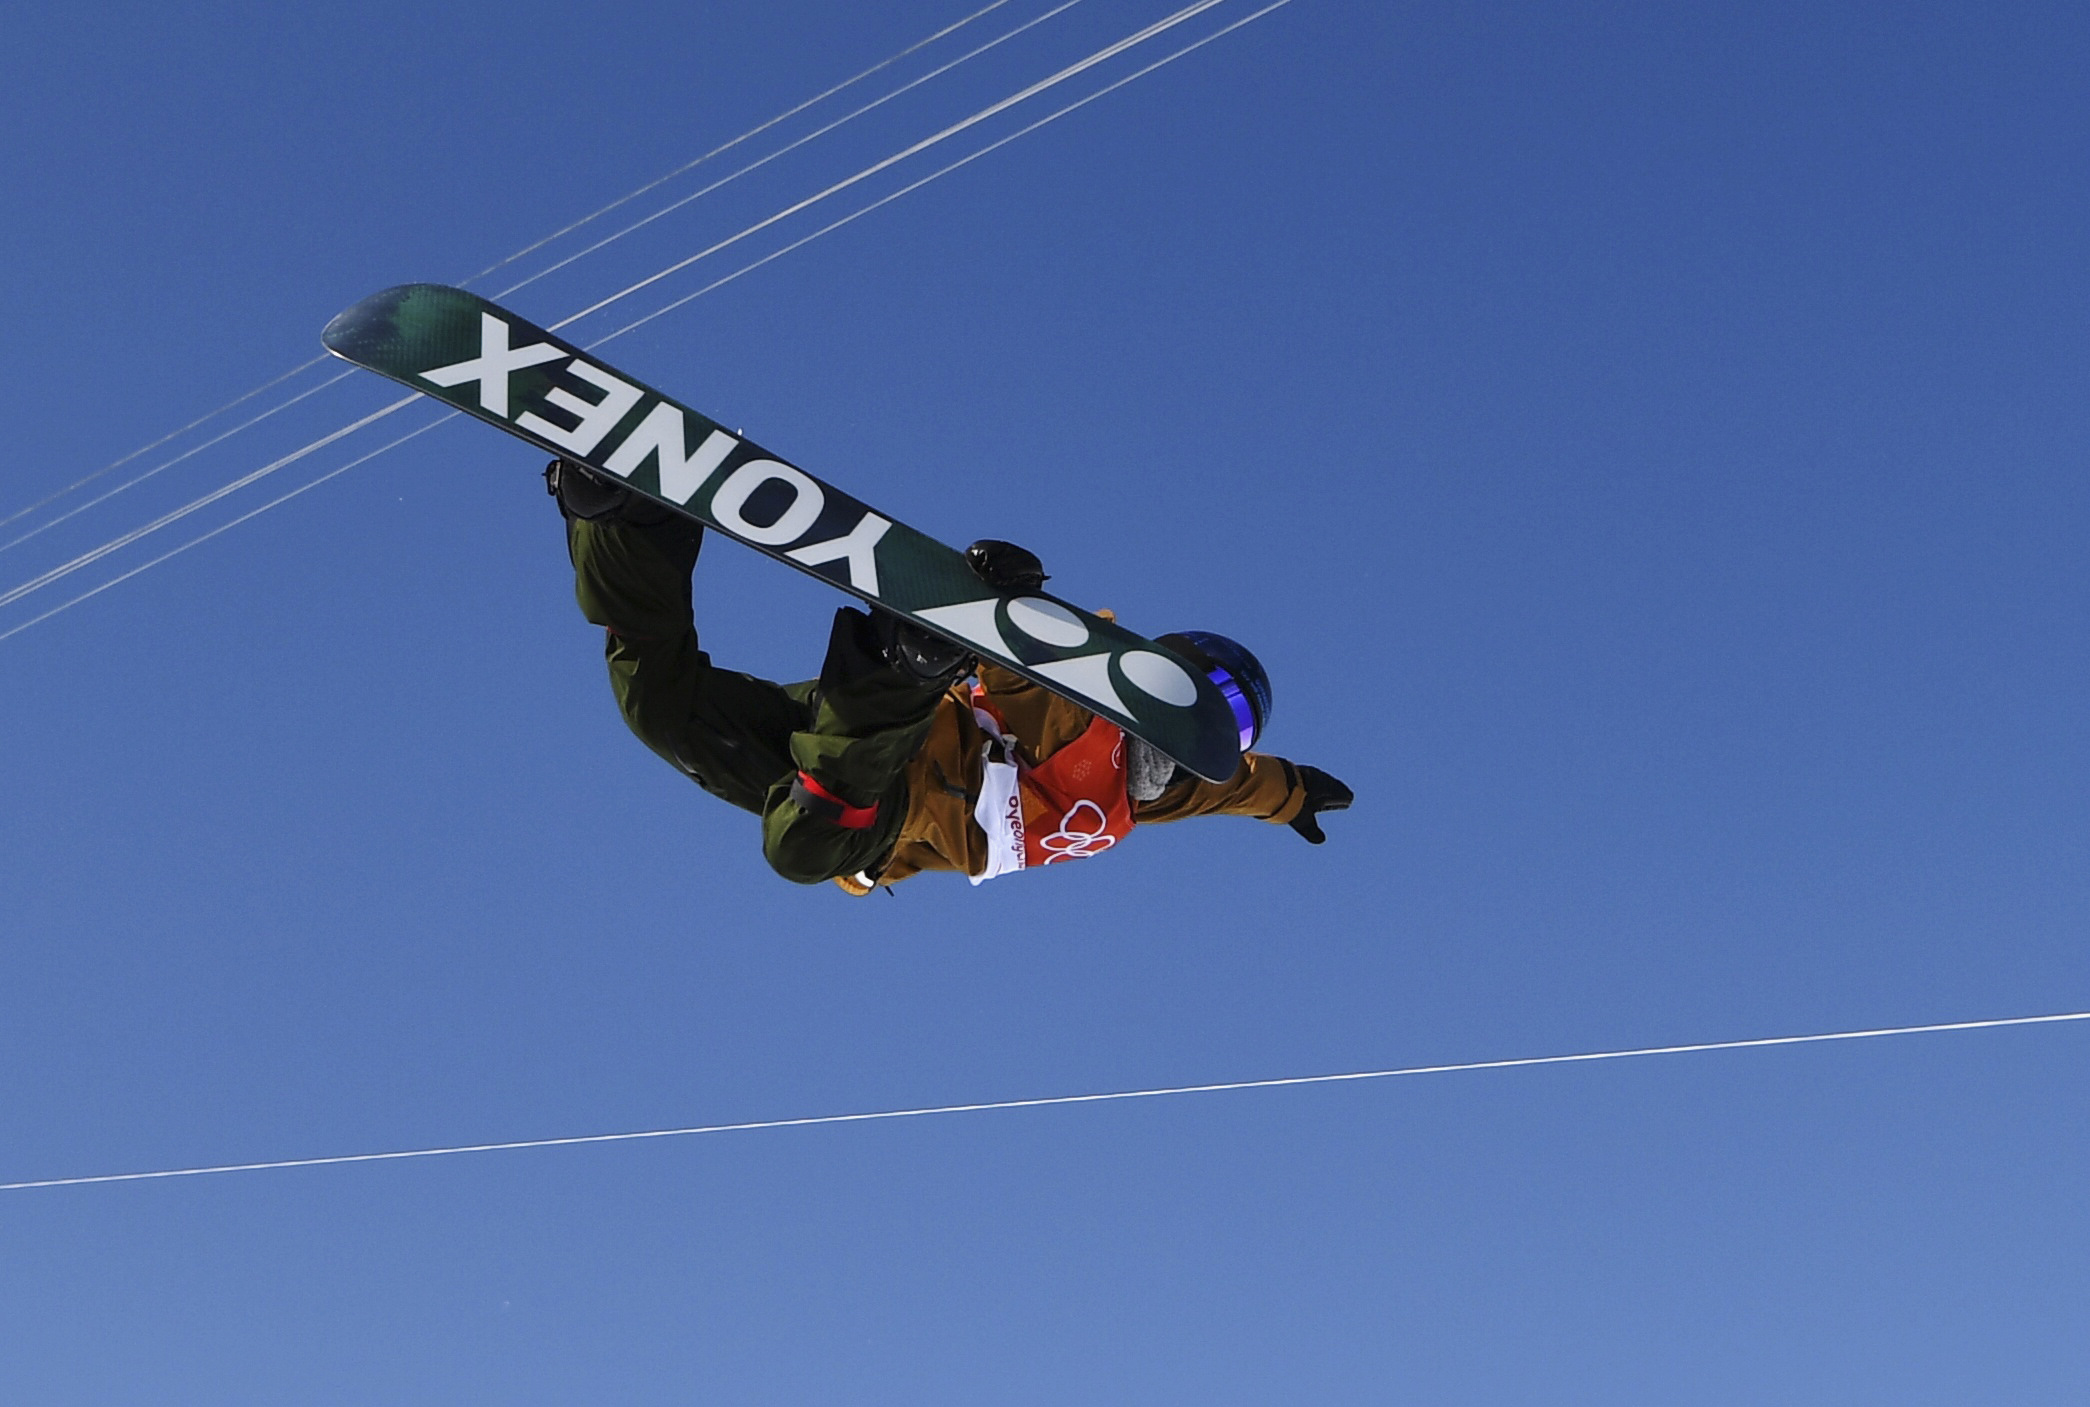 Queralt Castellet competing in the women's halfpipe finals (by Reuters)